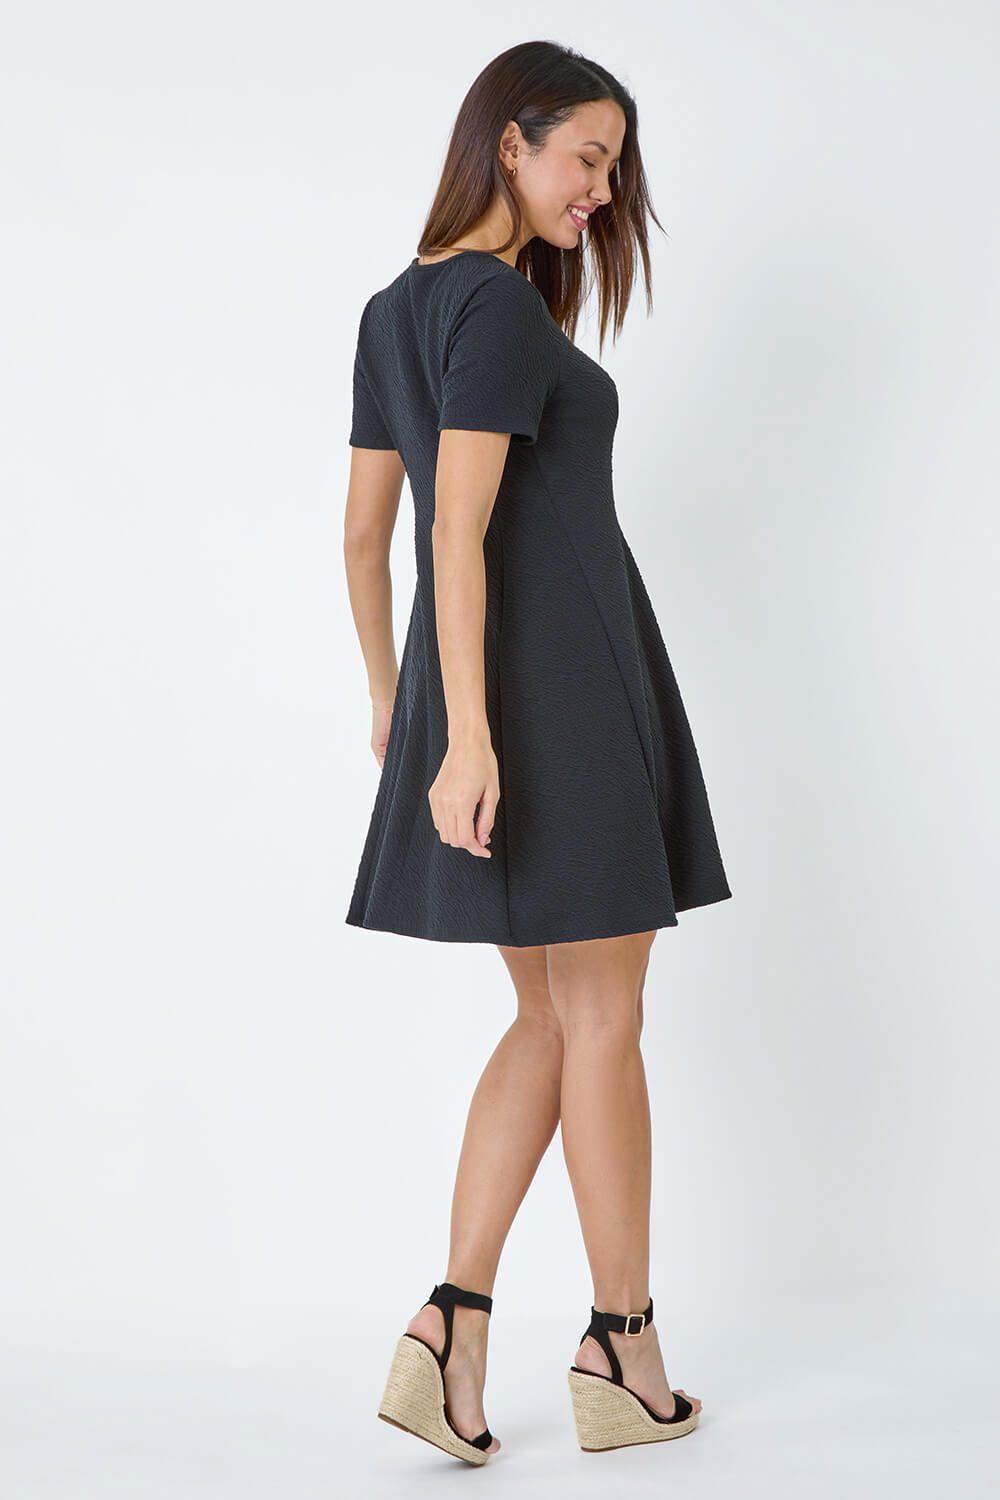 Black Luxe Stretch Pannelled Dress, Image 3 of 5